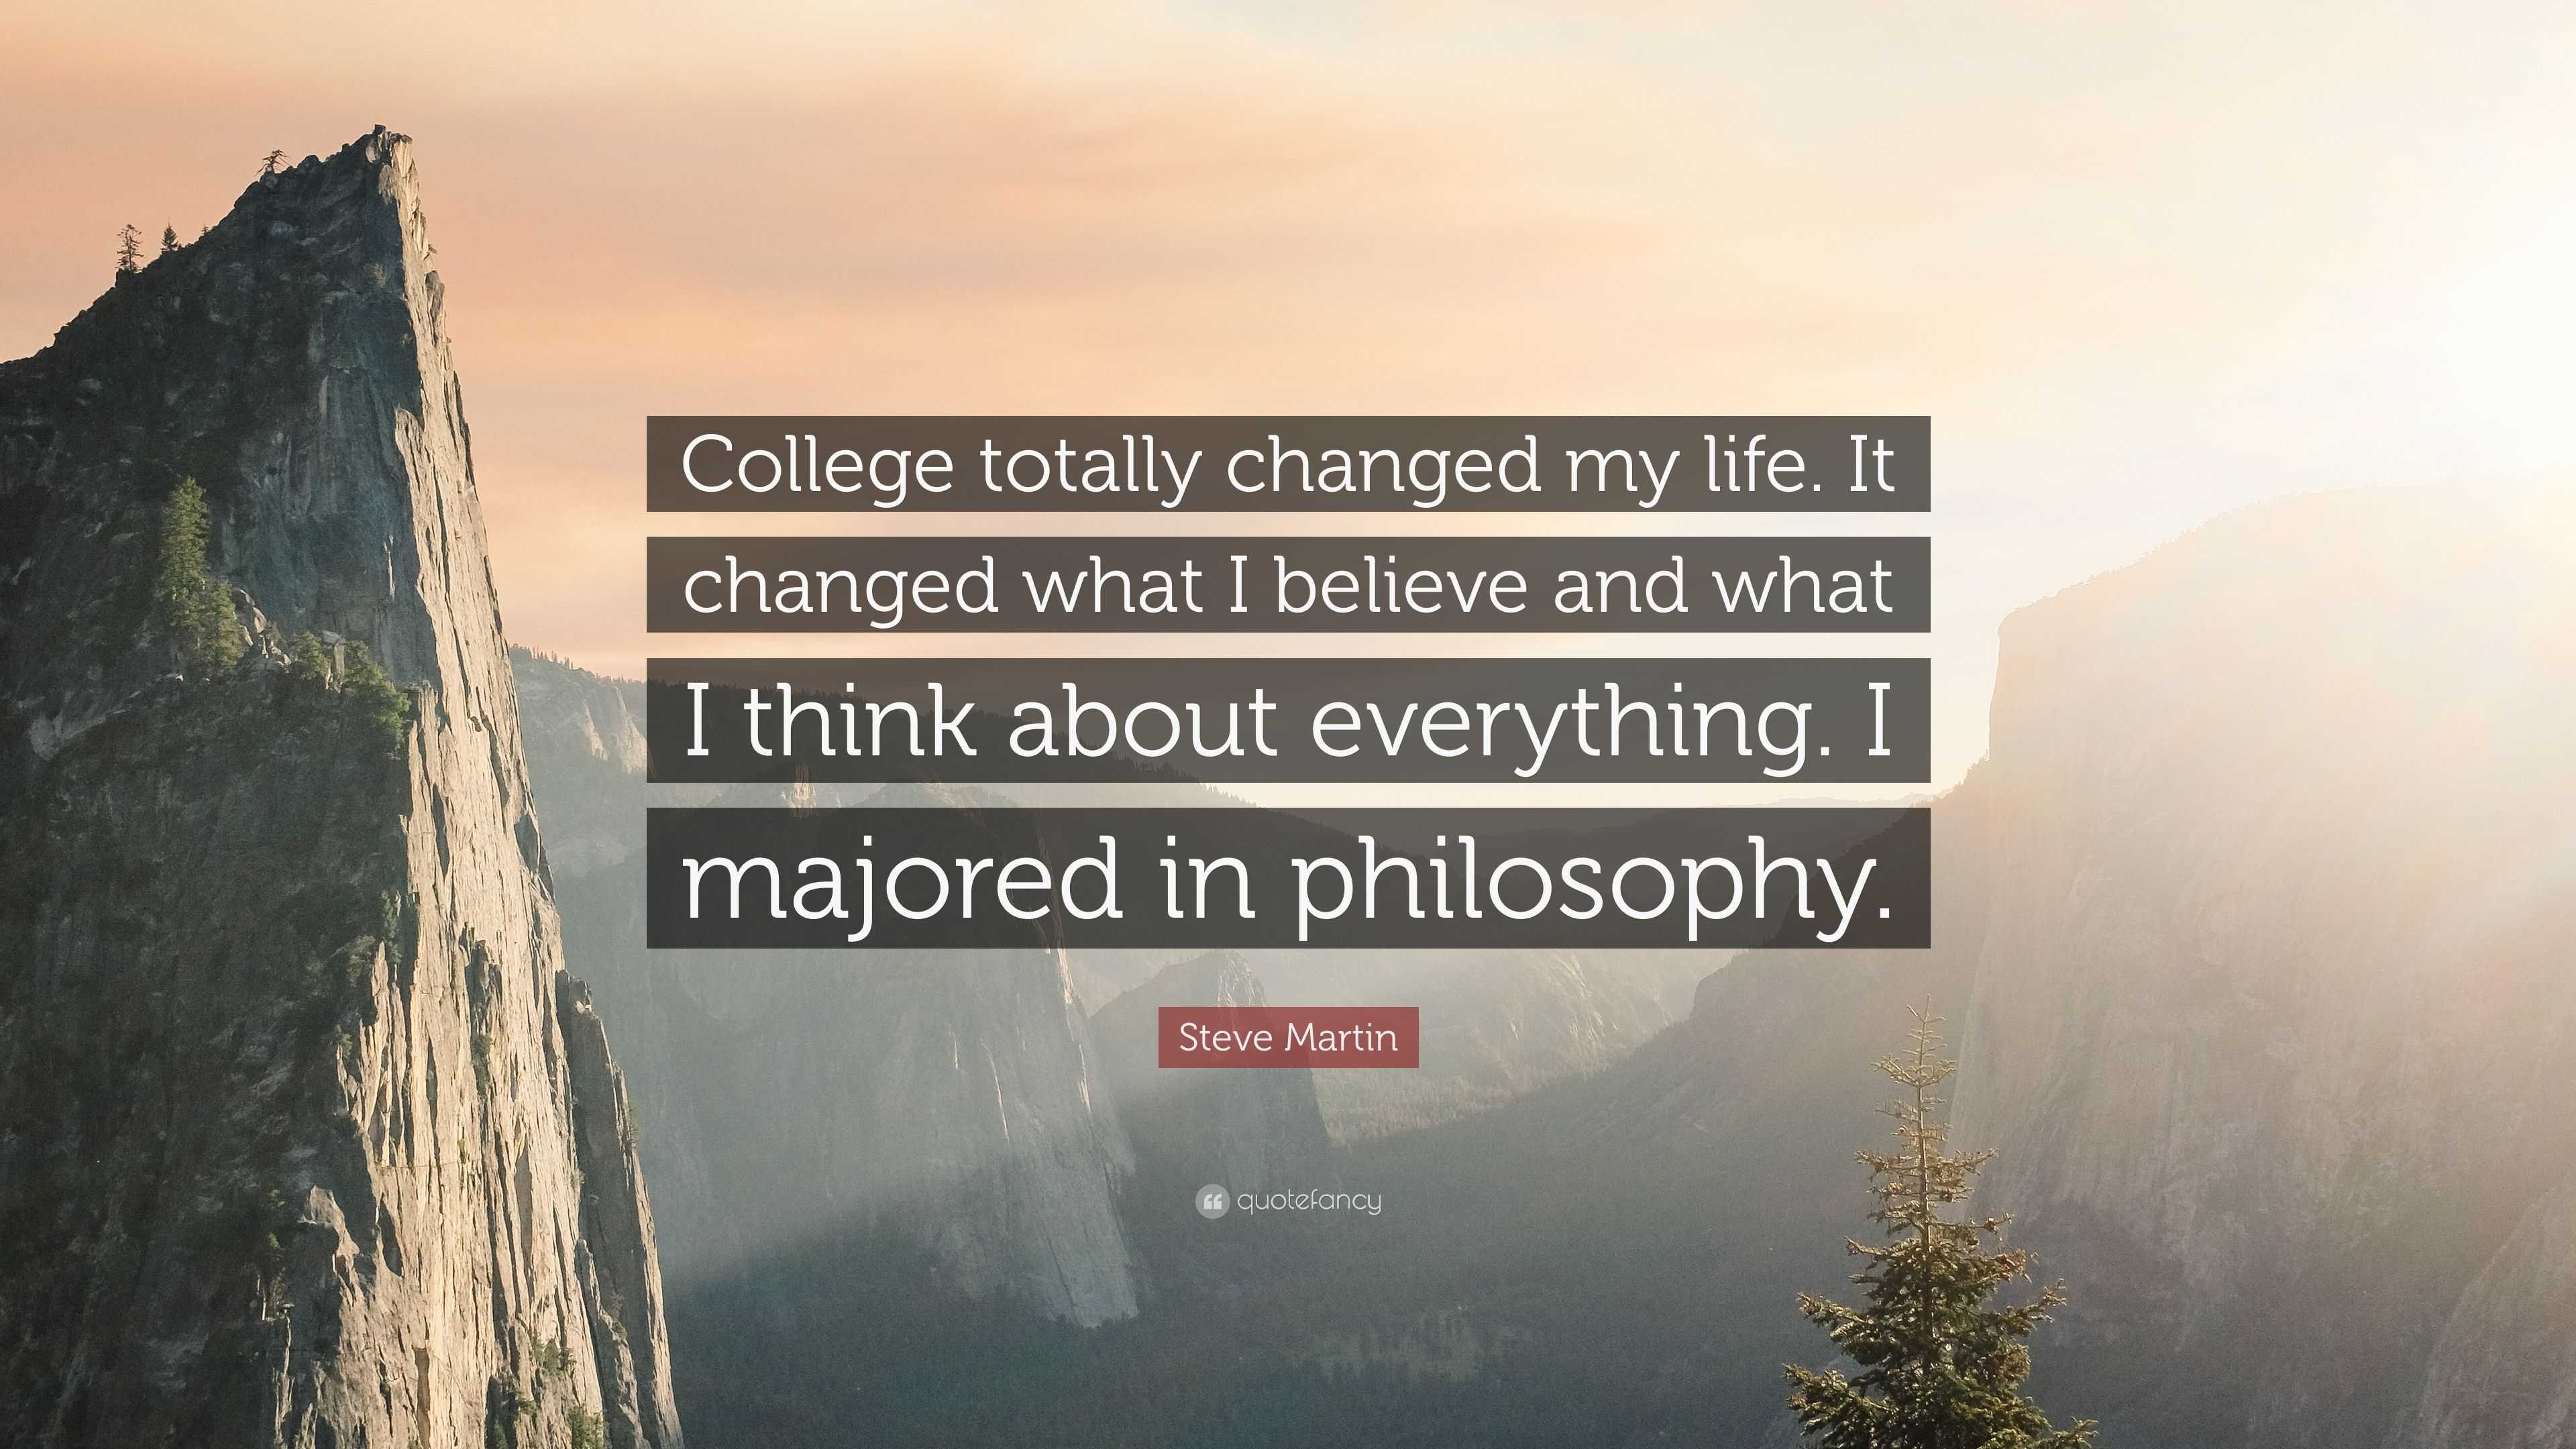 Steve Martin Quote “College totally changed my life It changed what I believe